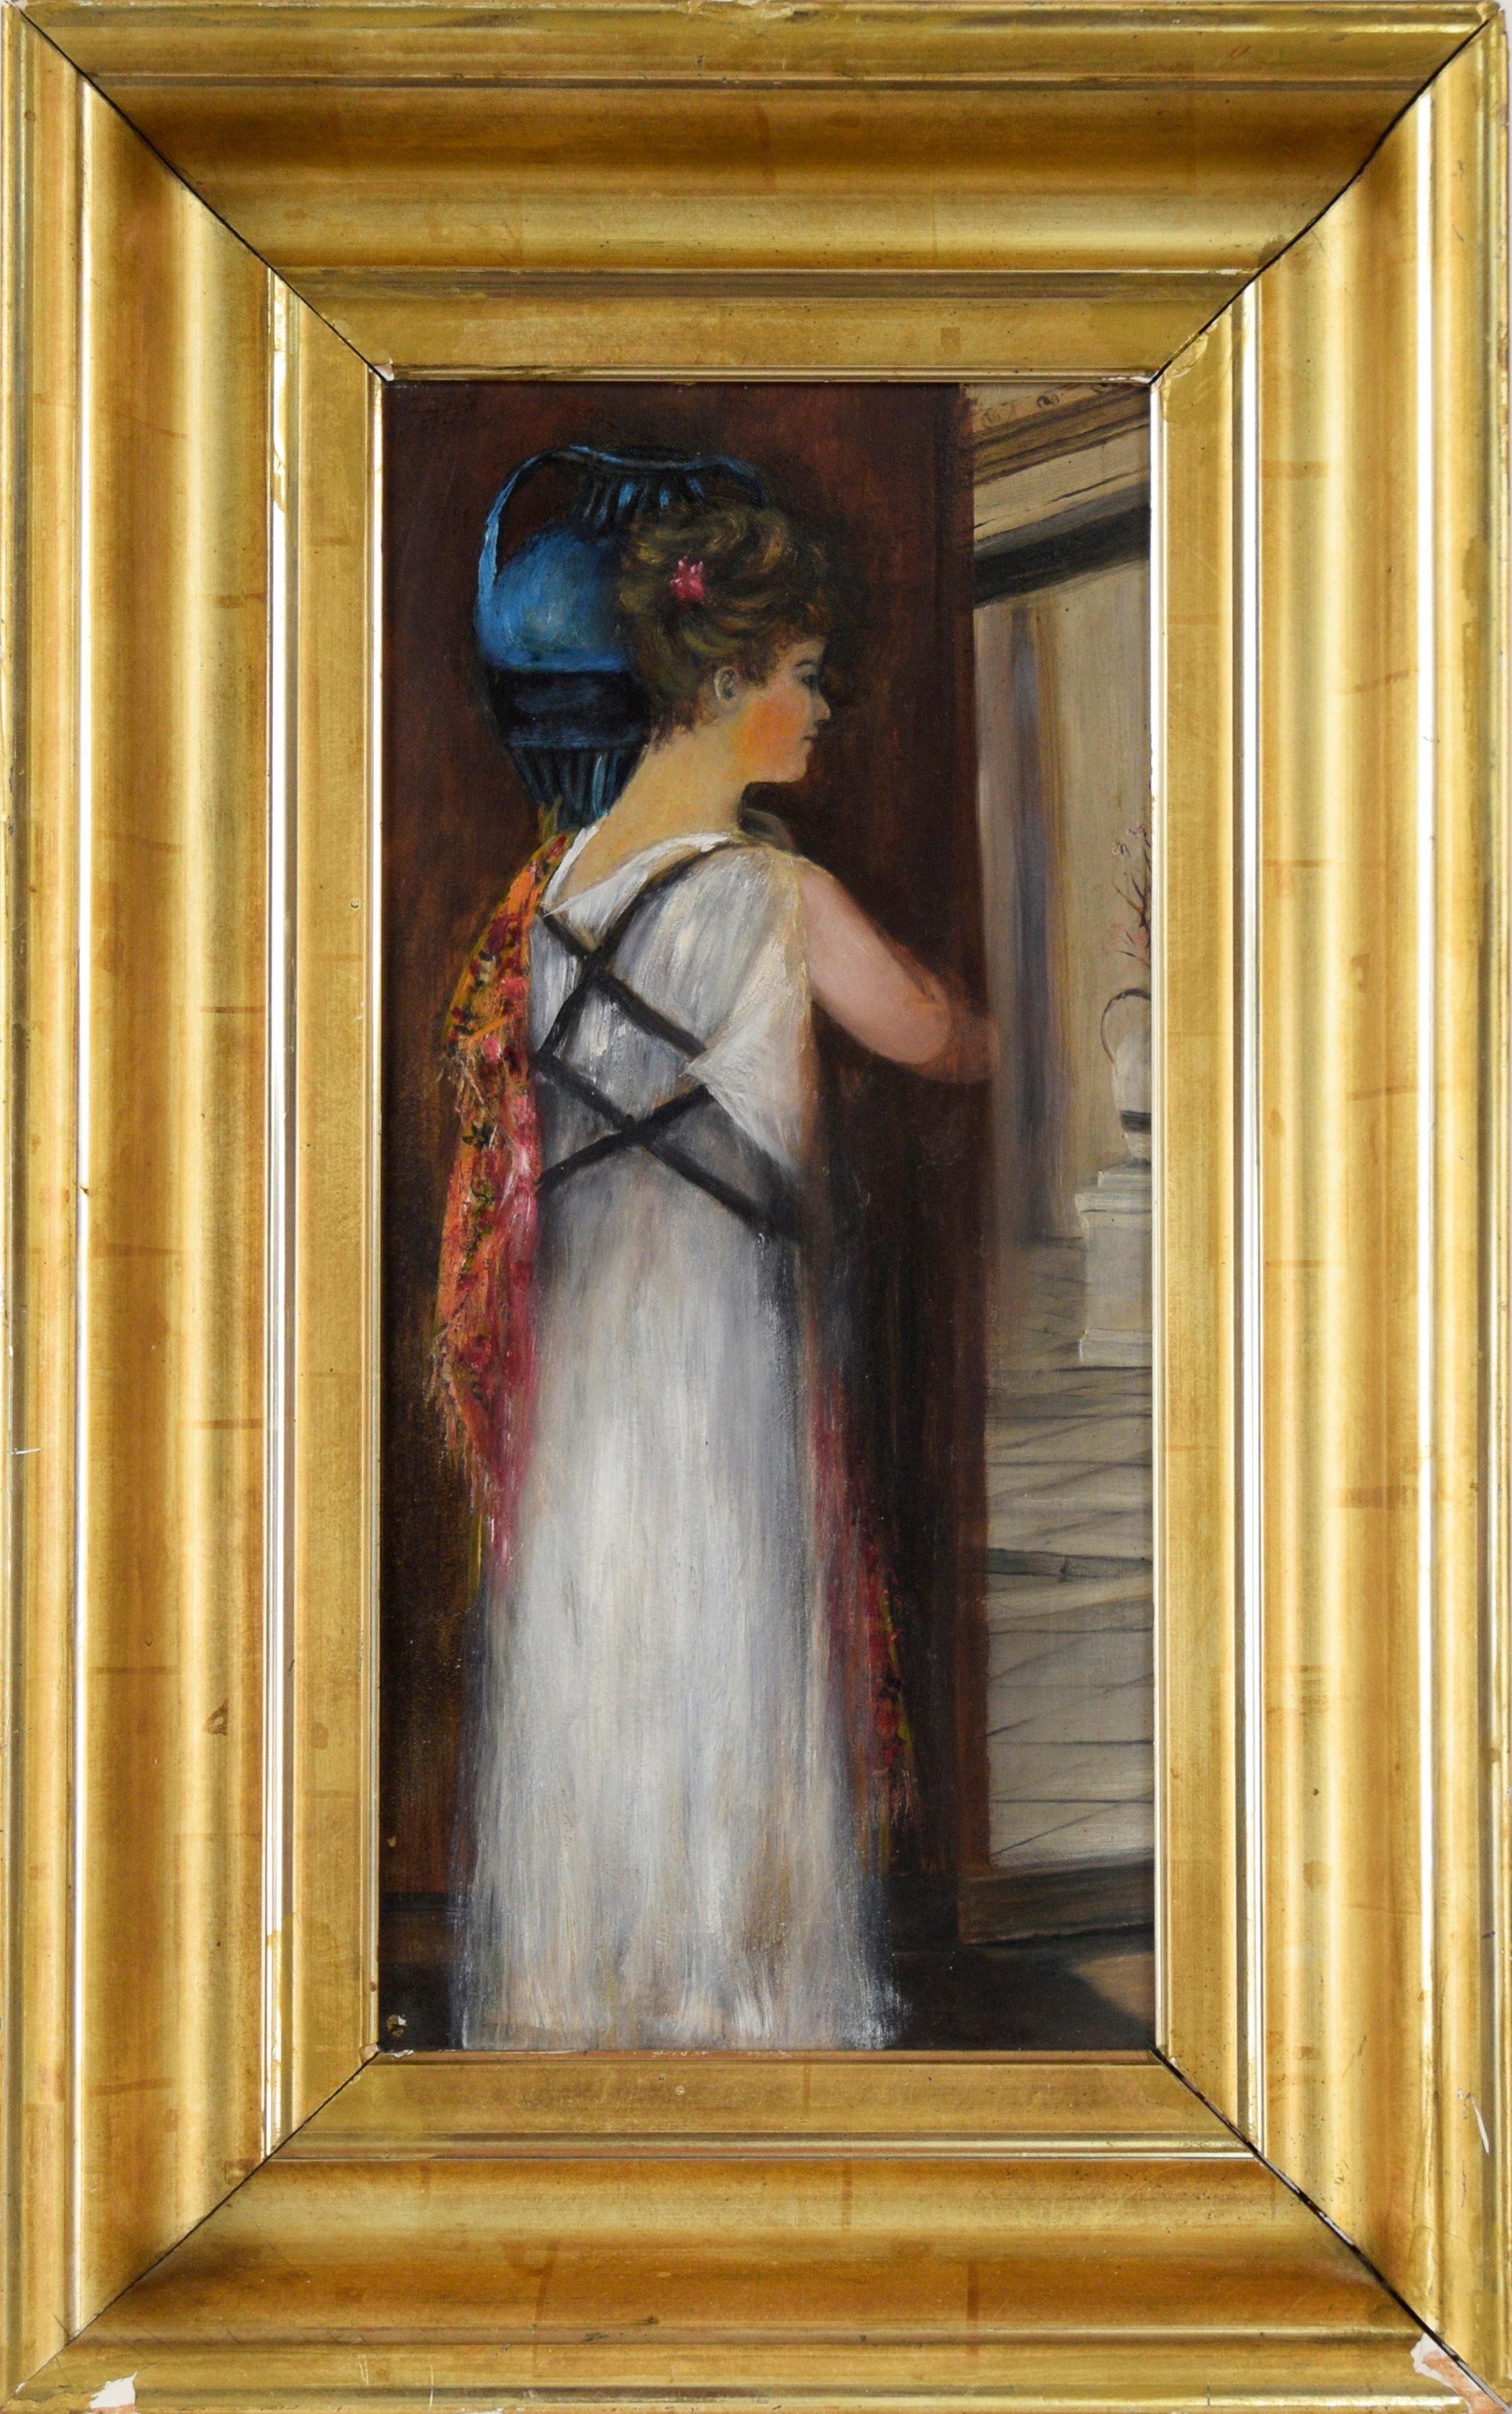 Athenian Woman Carrying a Water Jar In a White Dress - Impressionist Painting by 19th Century American School